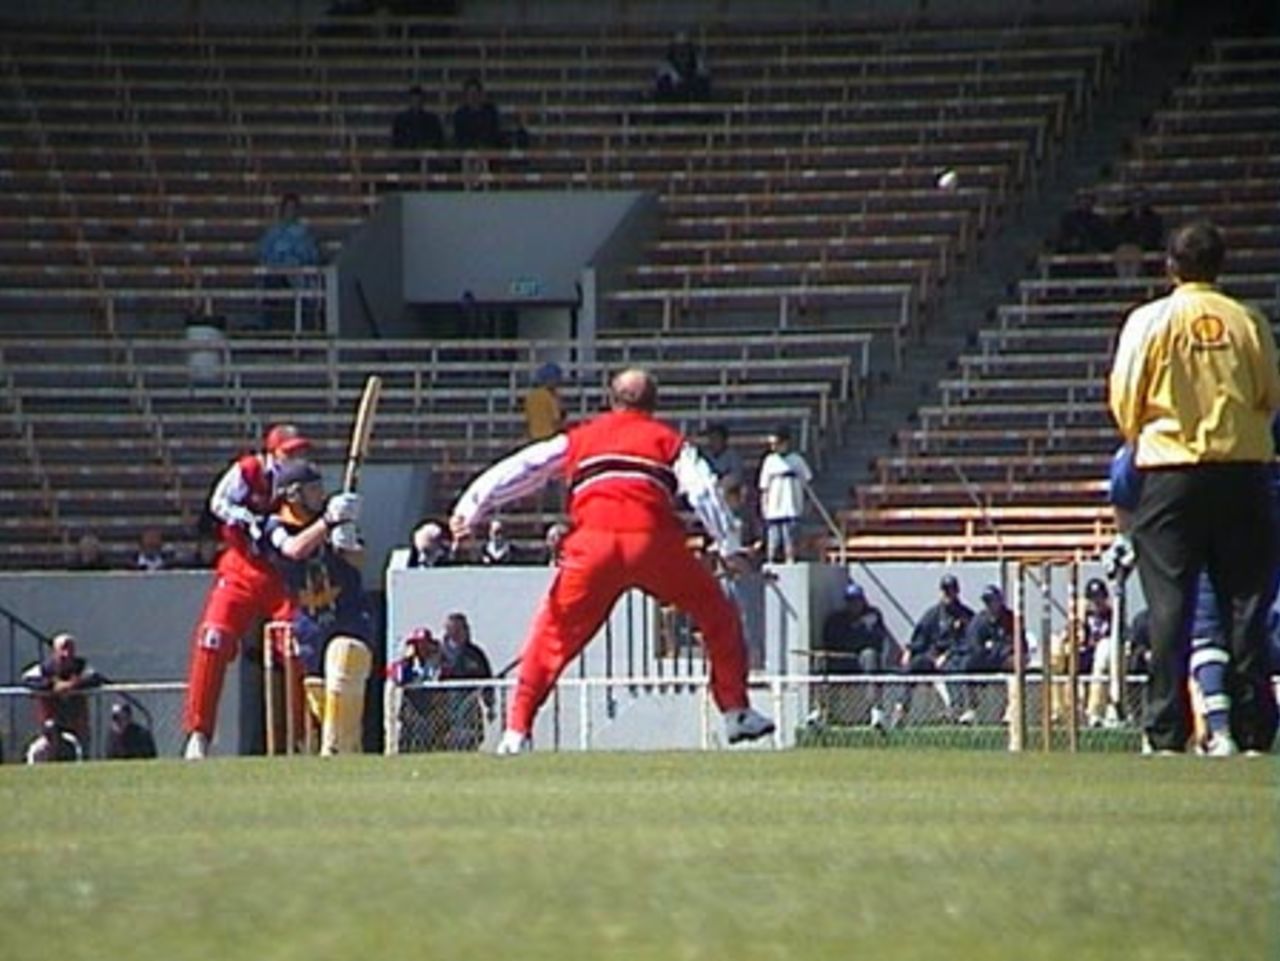 Otago batsman Chris Gaffaney chips a ball from Canterbury medium pacer Chris Harris straight to Gary Stead at midwicket to be dismissed for 52, Shell Cup: Canterbury v Otago at Jade Stadium, Christchurch, 16 January 2001